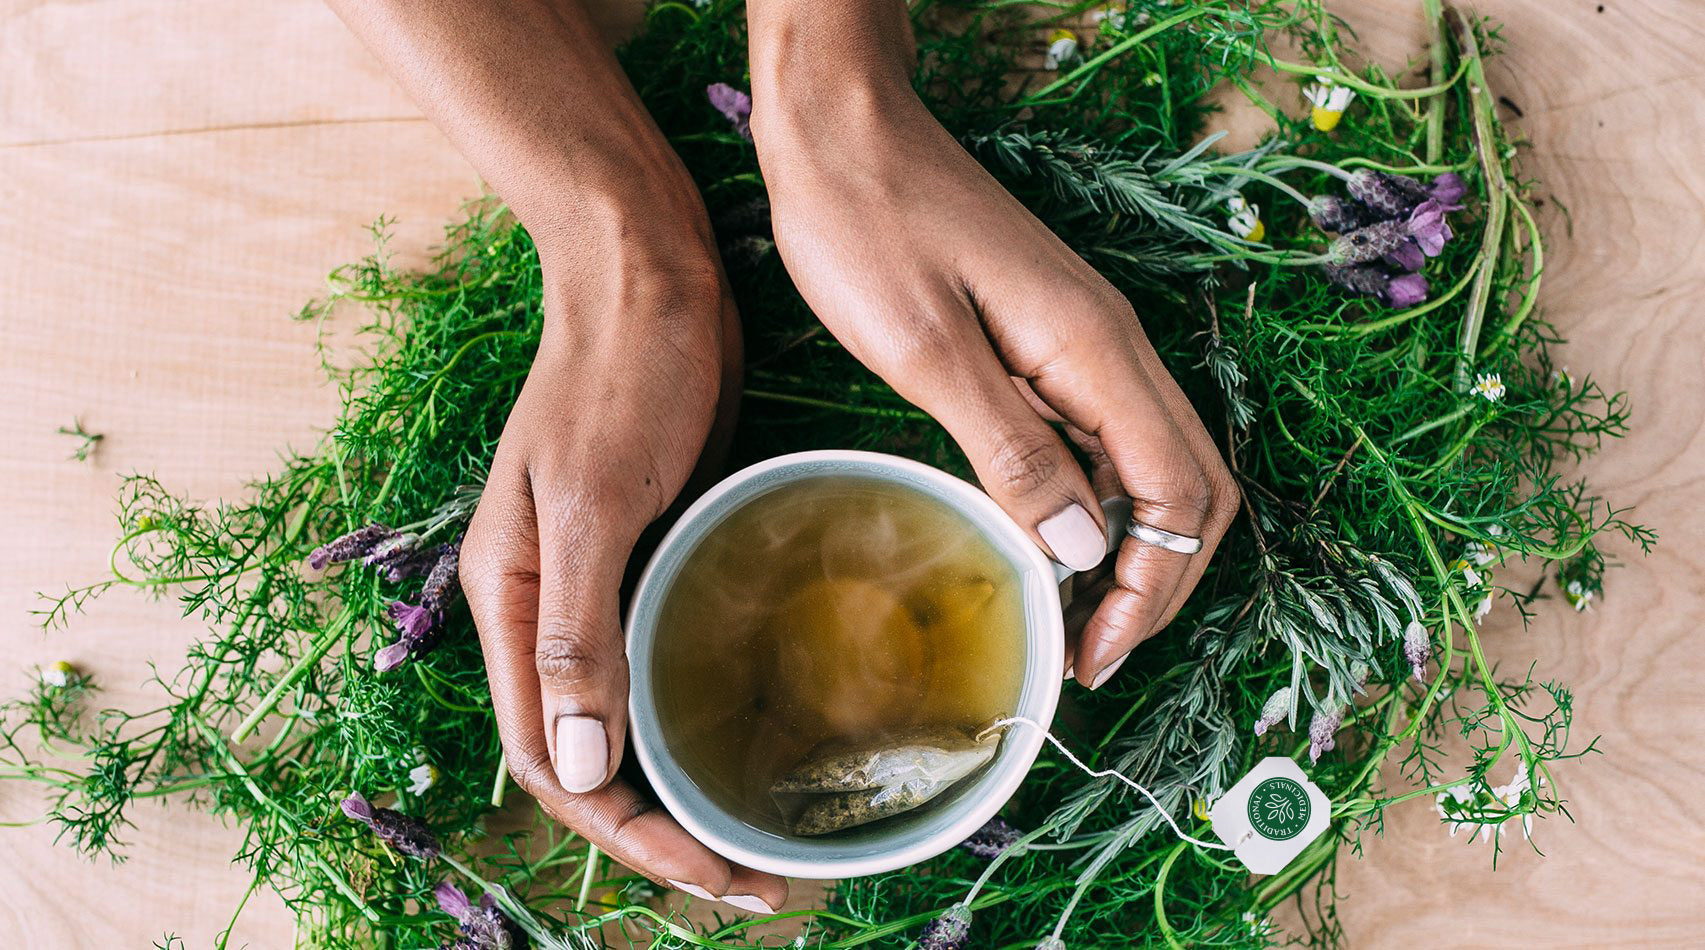 Organic Chamomile Lavender Tea Brewing in Cup being held in Hands